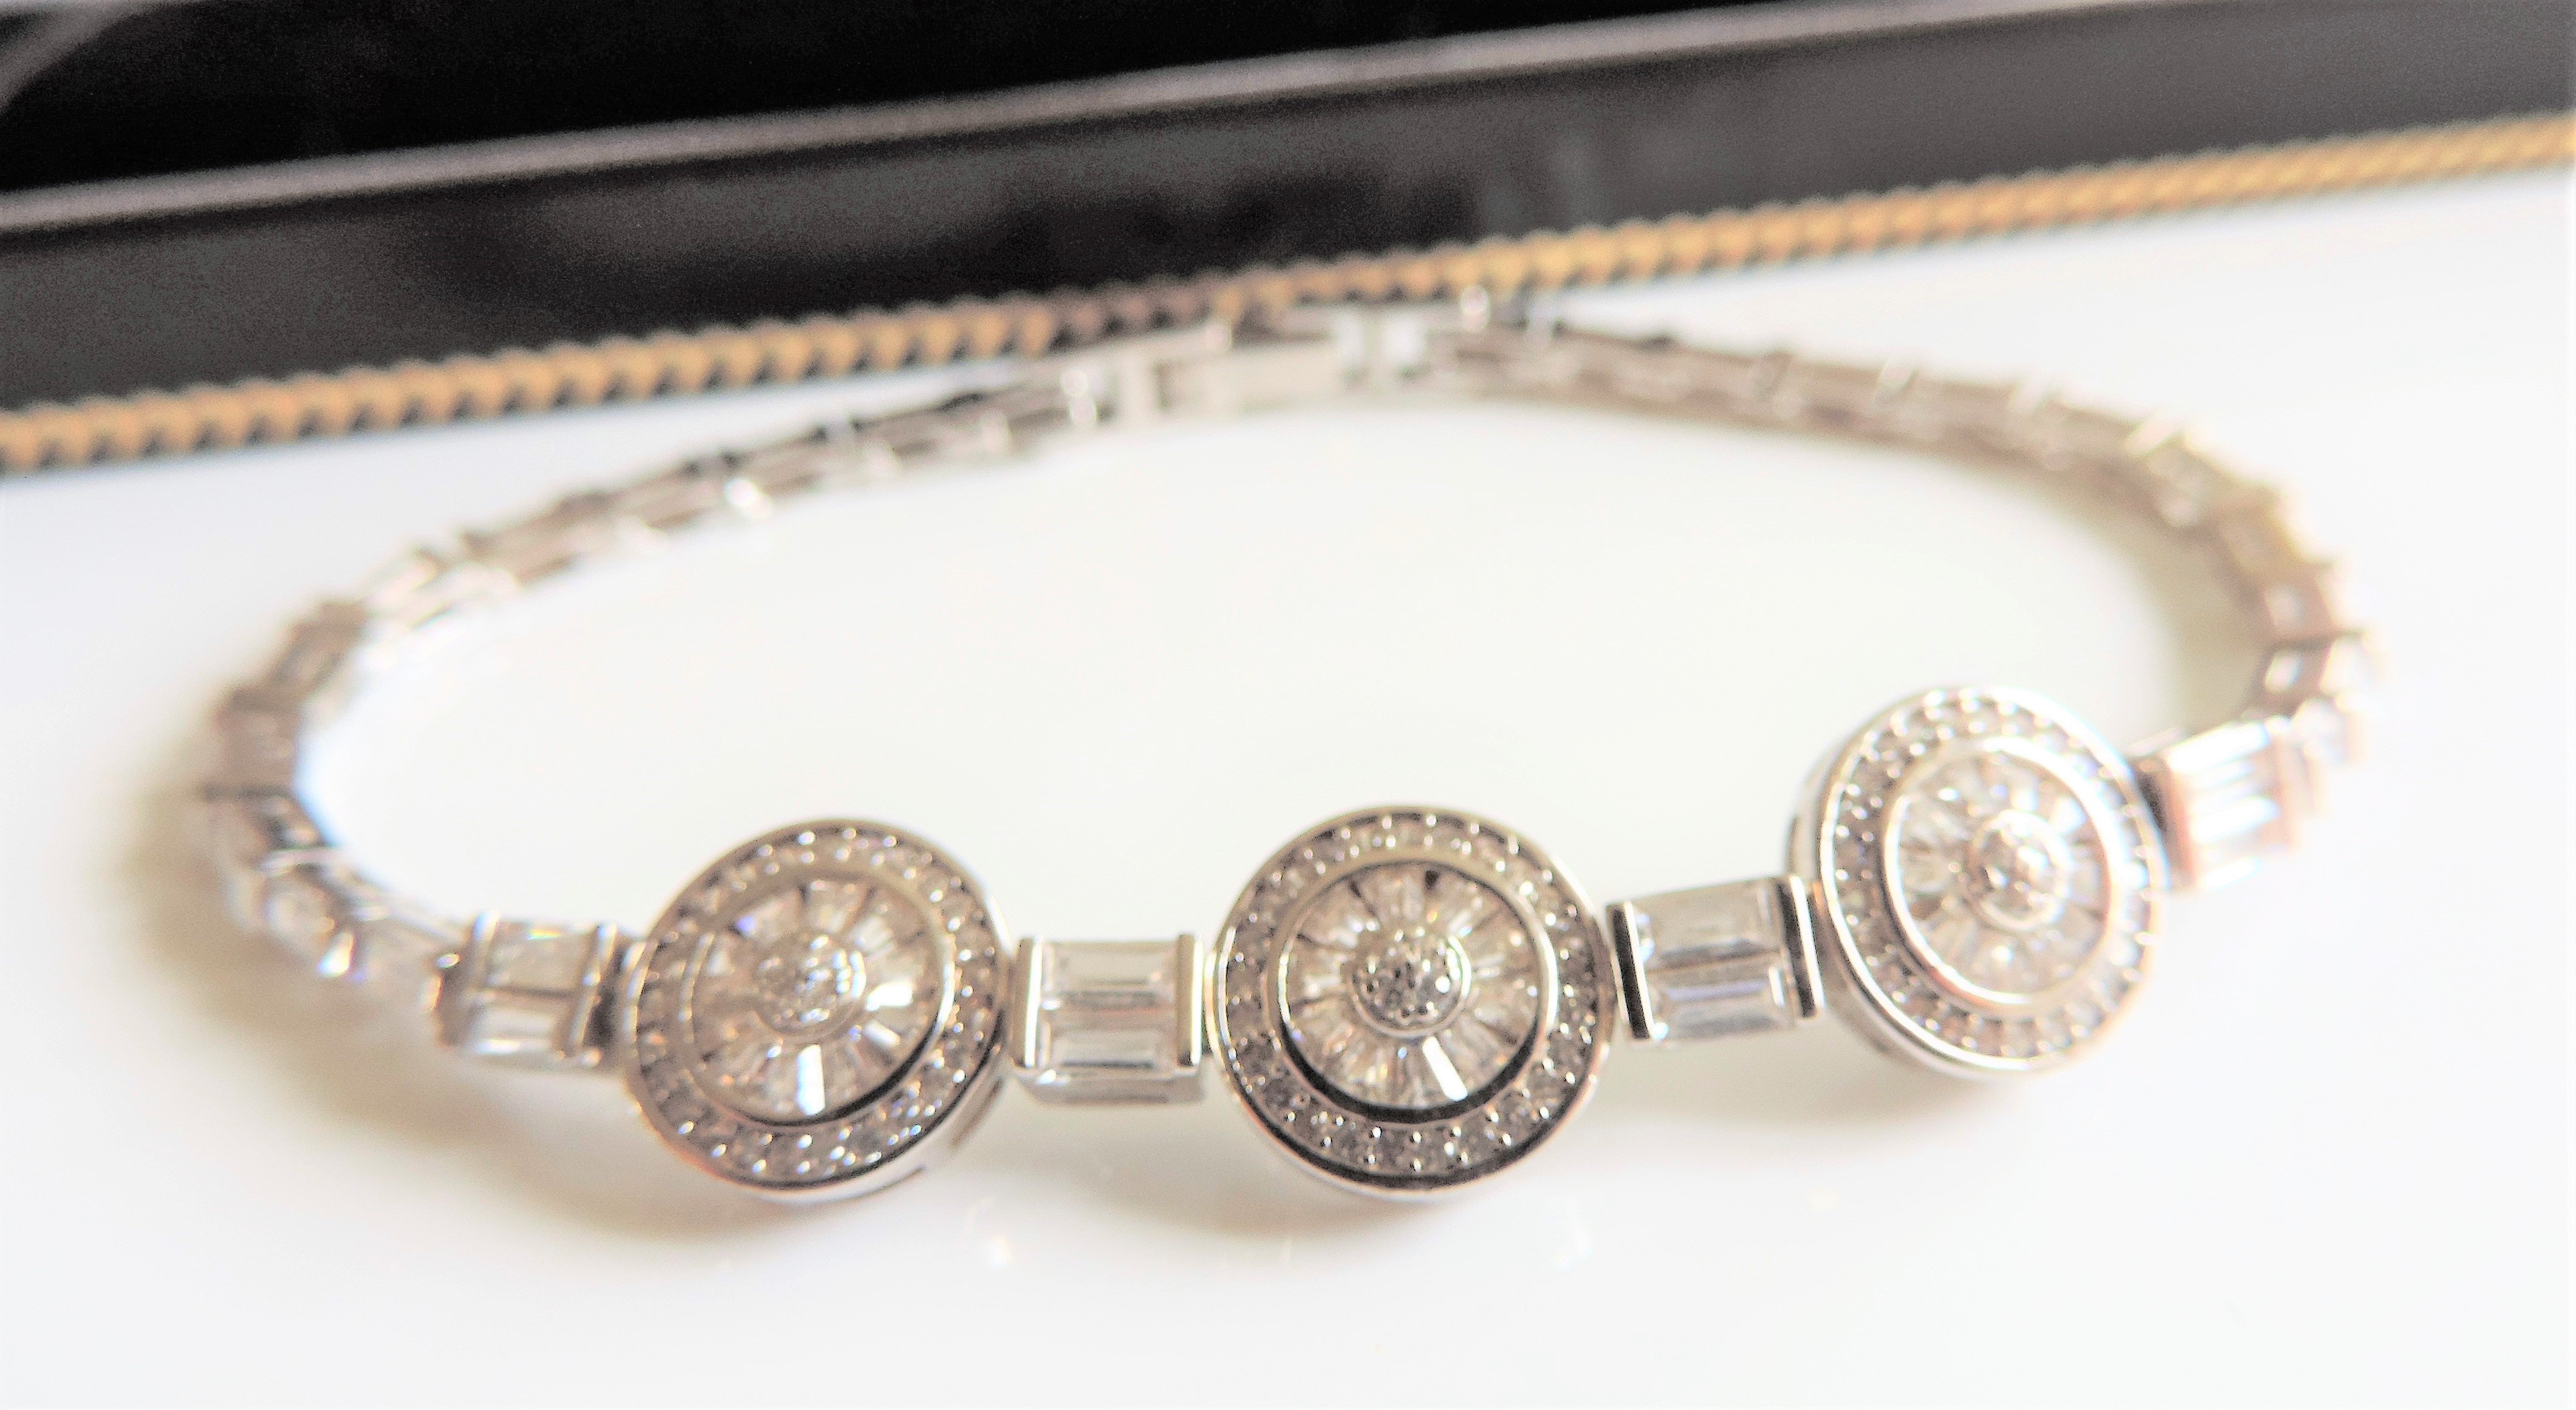 Sterling Silver White Sapphire Bracelet - Image 2 of 10